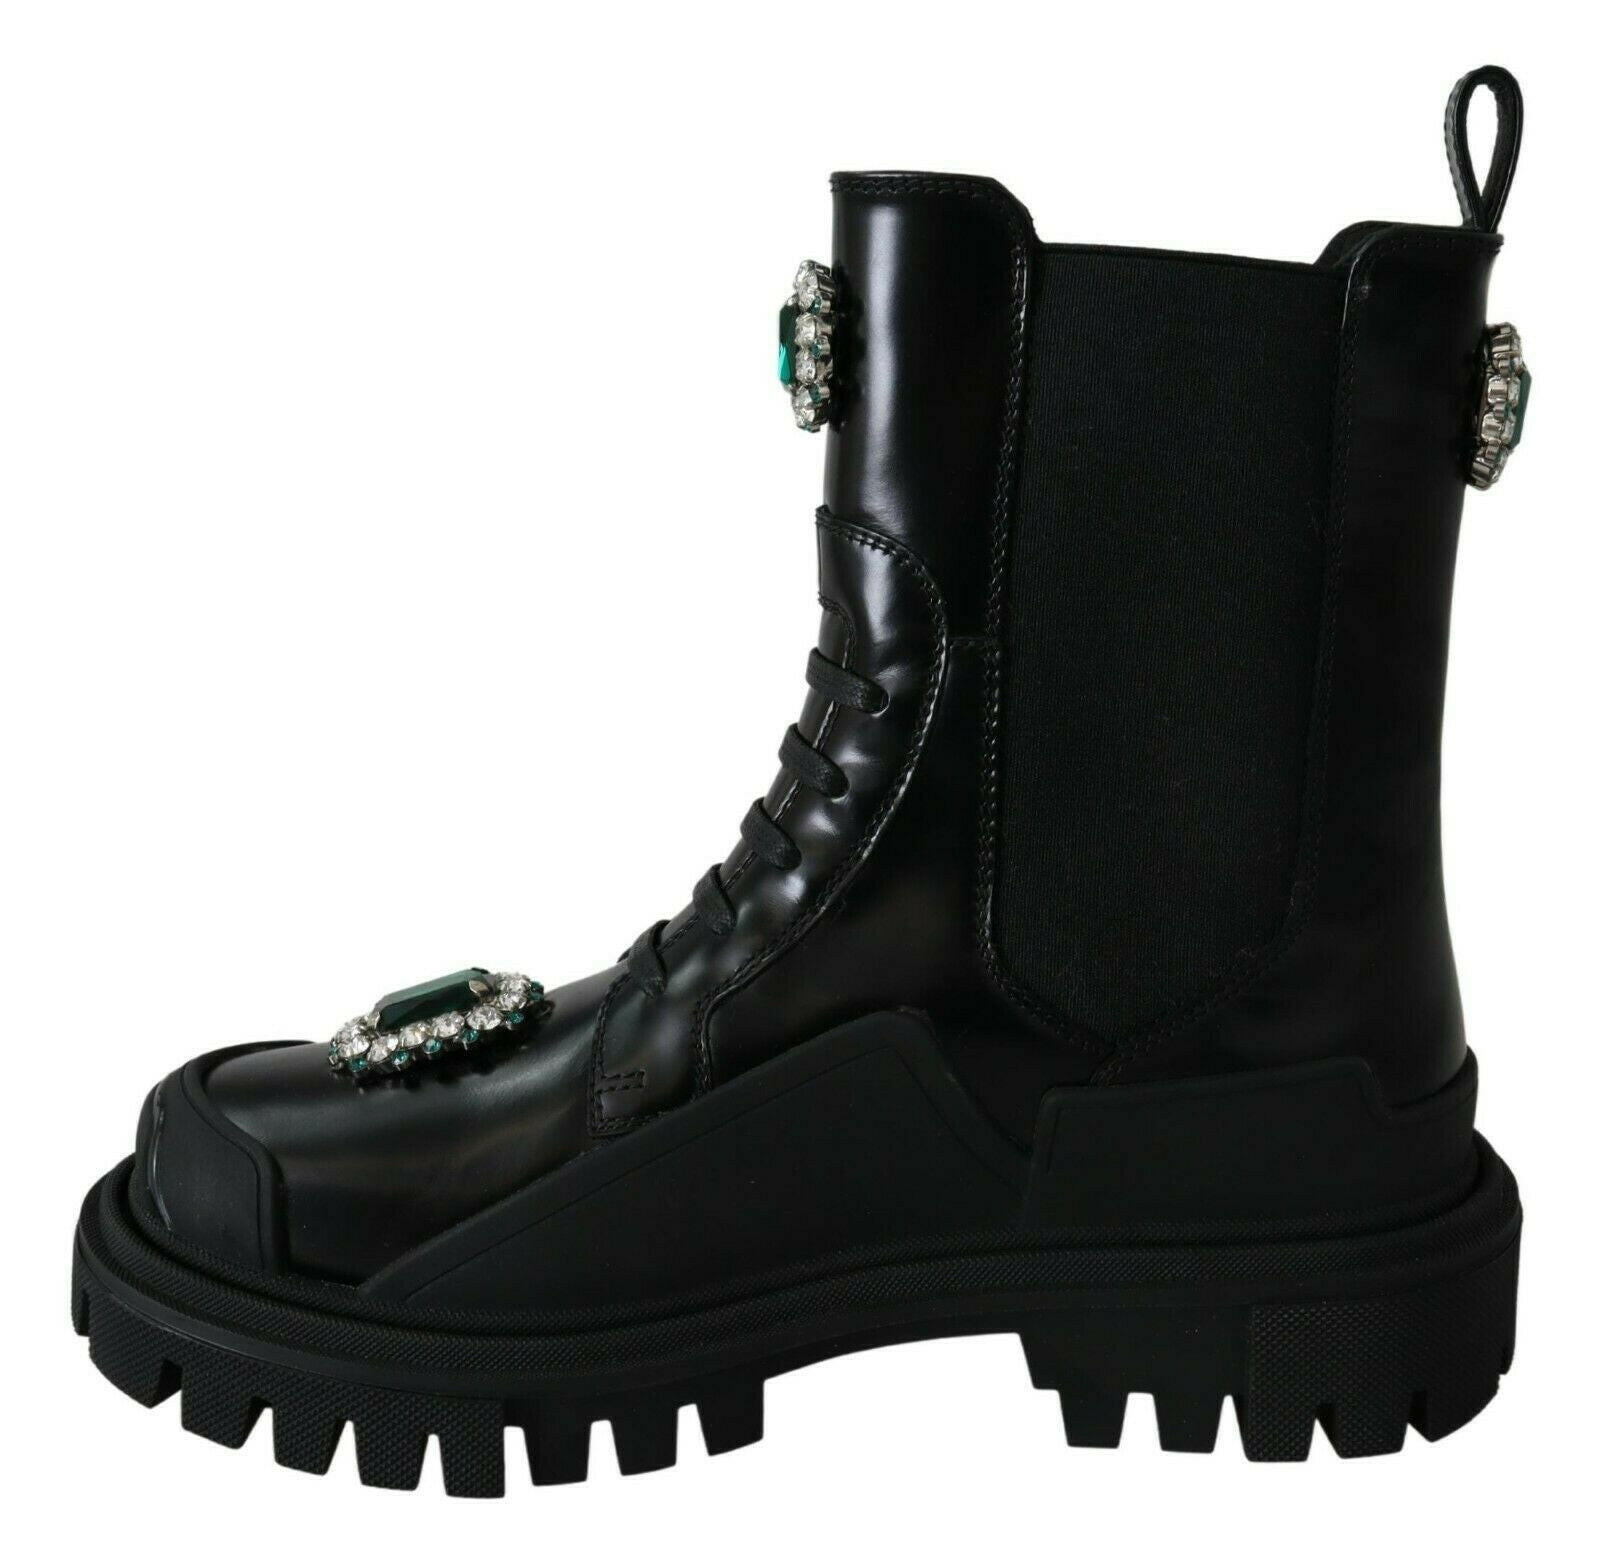 Dolce & Gabbana Black Leather Crystal Combat Boots - GENUINE AUTHENTIC BRAND LLC  